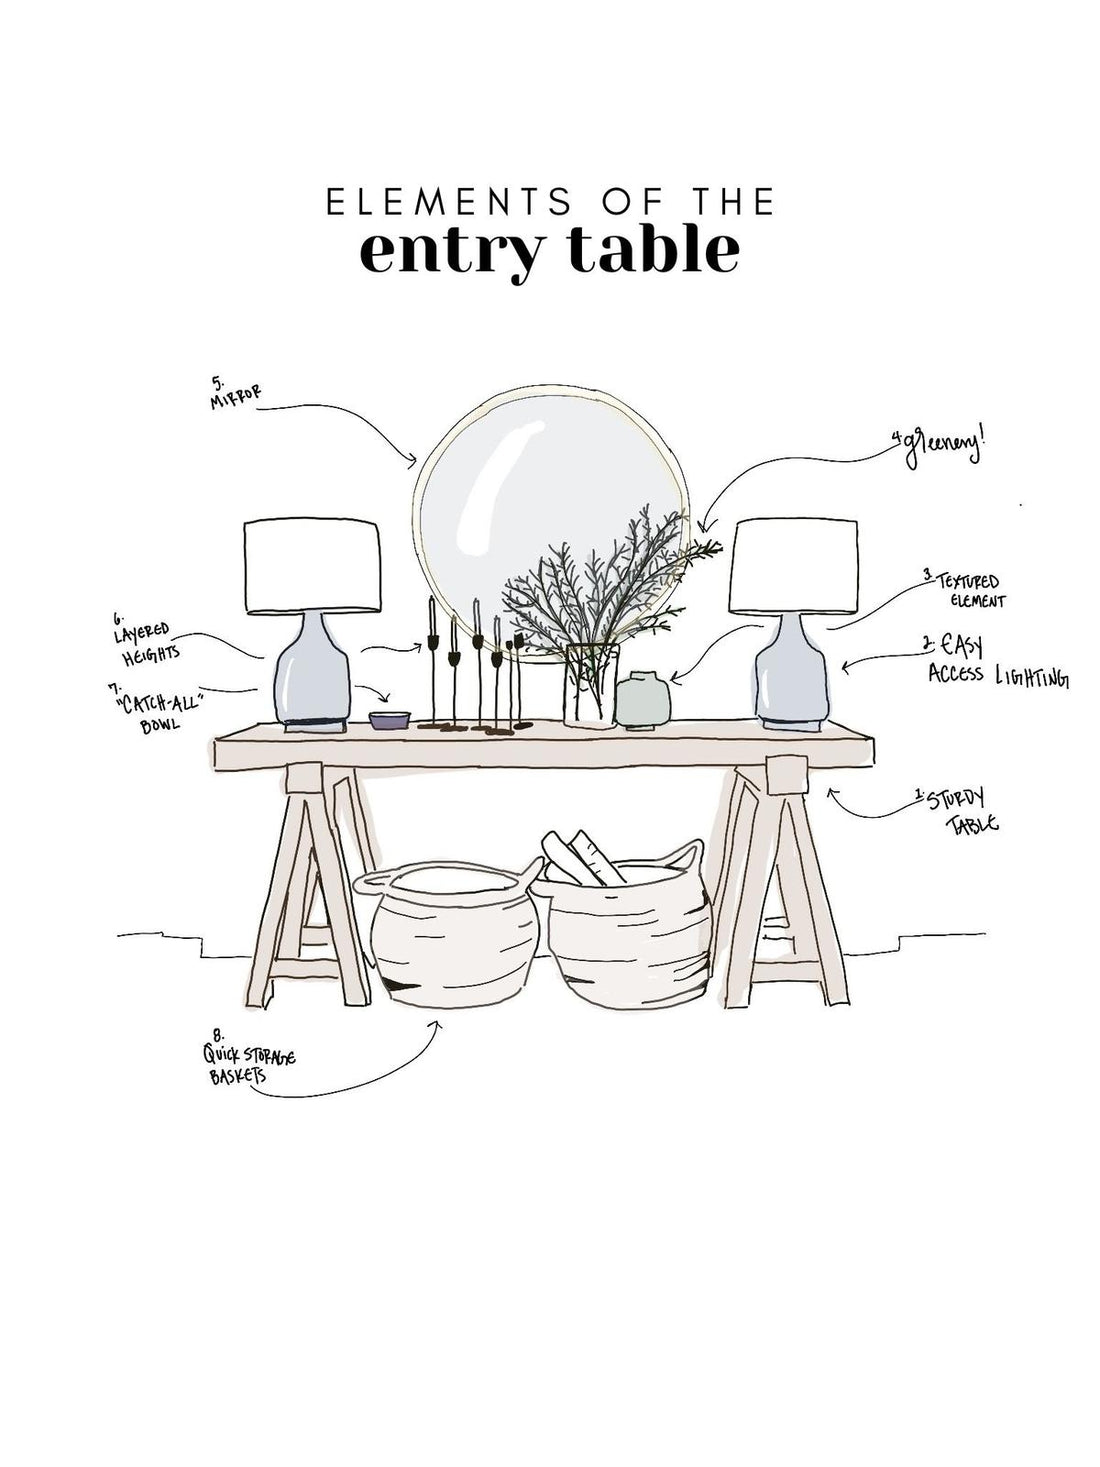 Elements of An Entry Table By Stylesmepretty.com